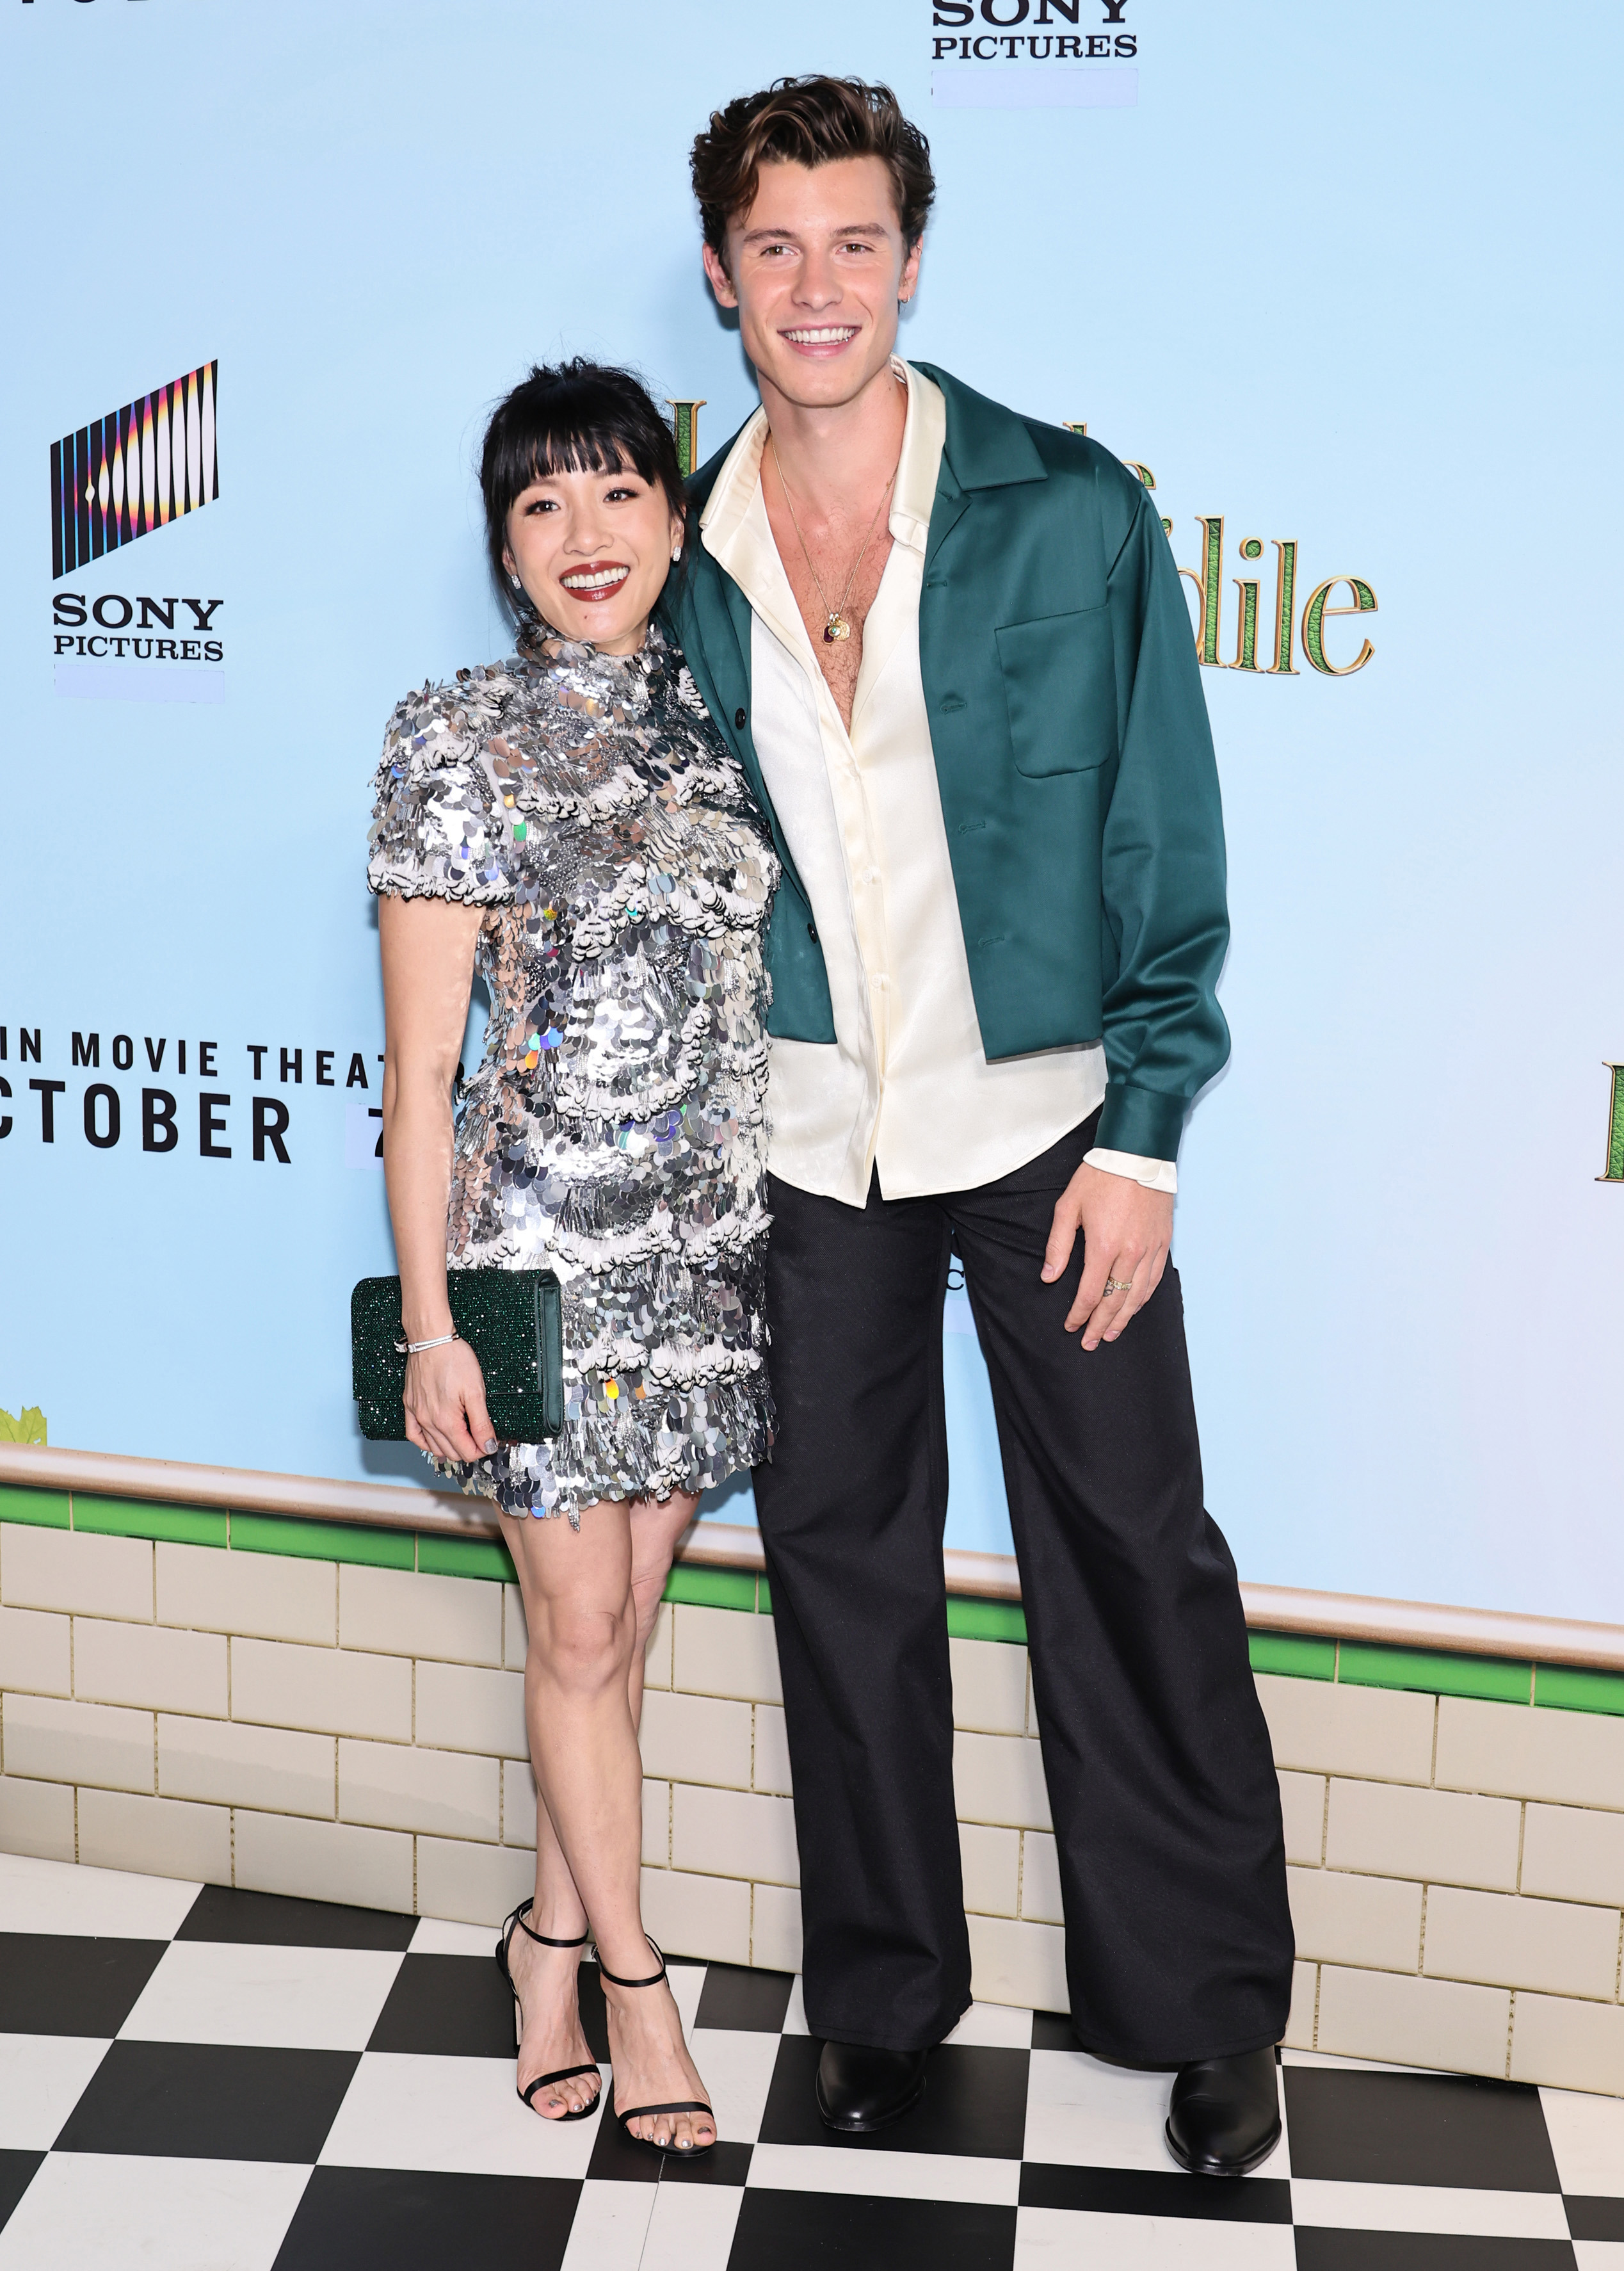 Constance Wu and Shawn Mendes attend the world premiere of Lyle, Lyle, Crocodile on October 2 in New York City.